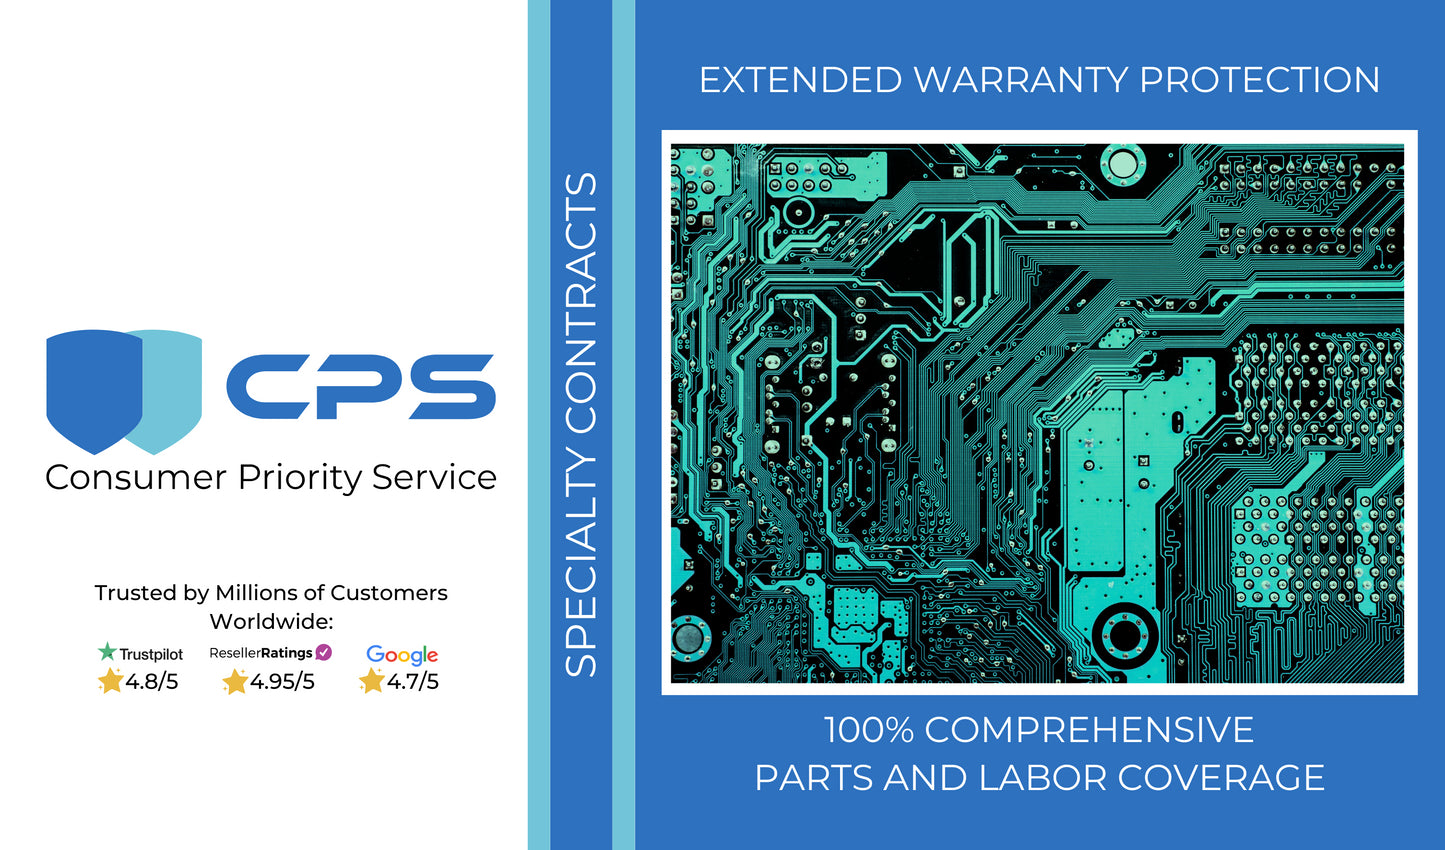 CPS 2 Year Extended Warranty under $5,000.00 - For OEM Products